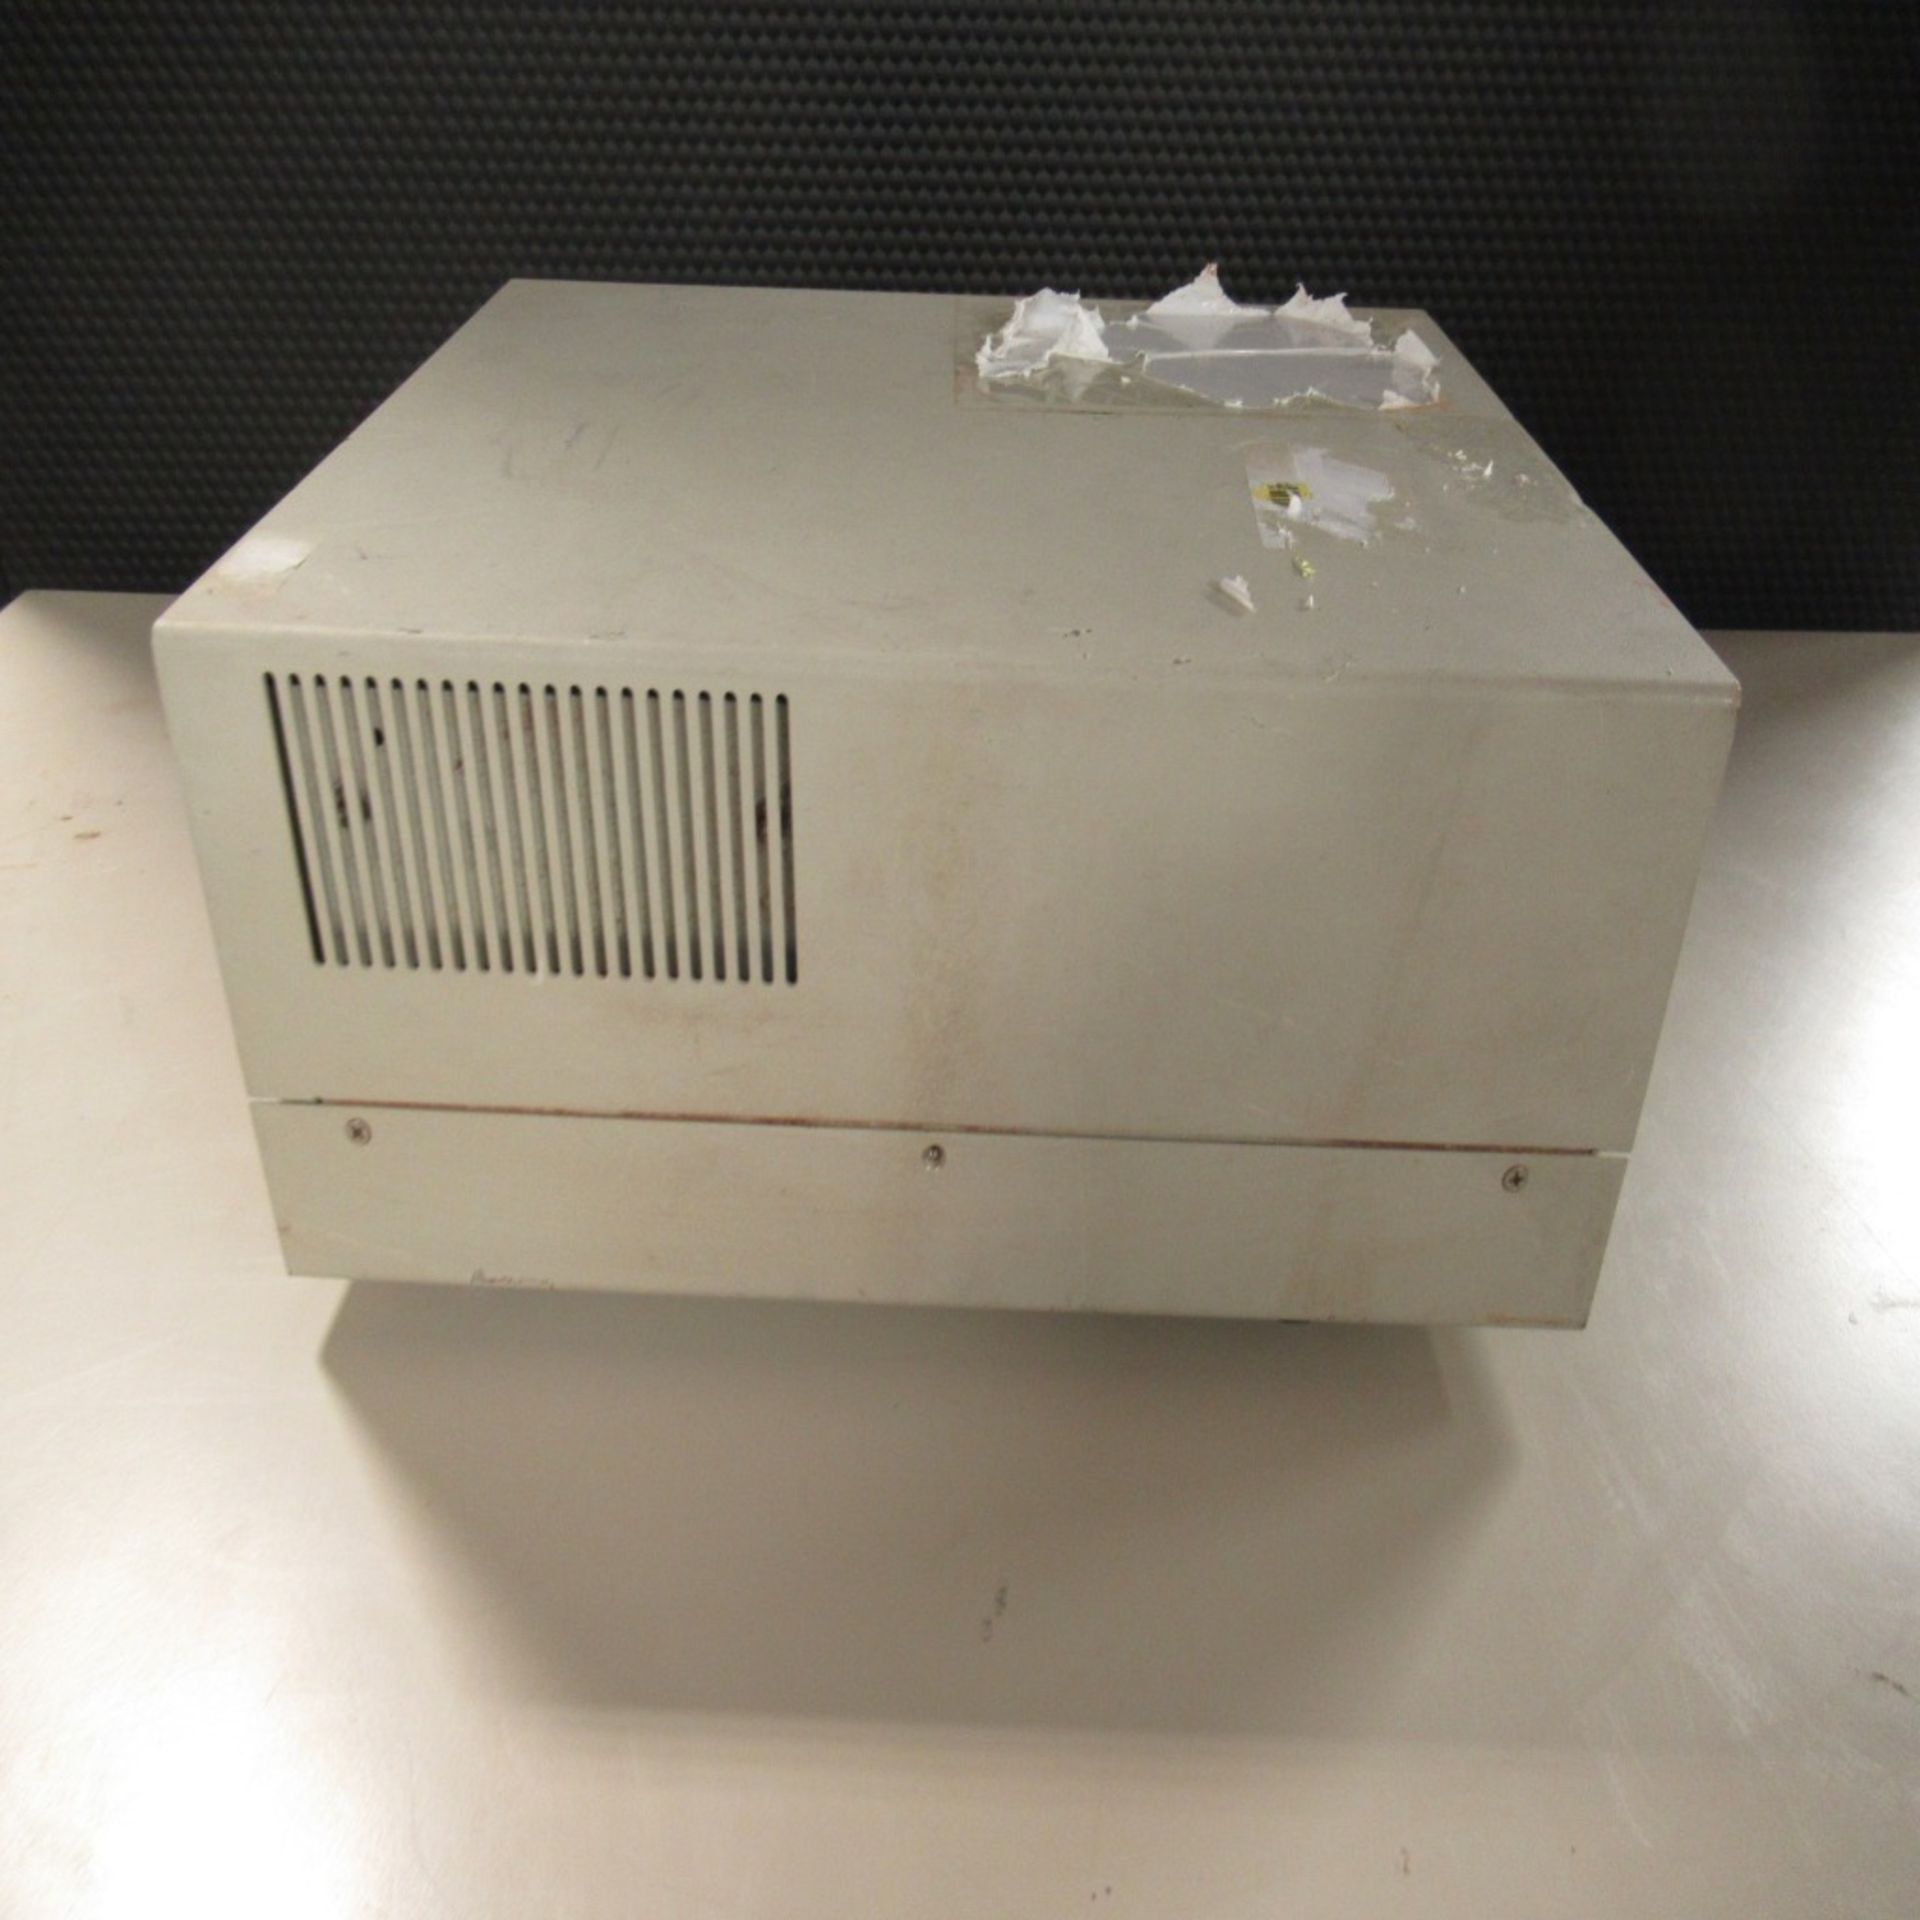 PHOTON SNAP SHOT MODEL 6000 *POWERS ON* NO SCREEN DISPLAY; FARNELL AP20-80 REGULATED POWER SUPPLY * - Image 4 of 222